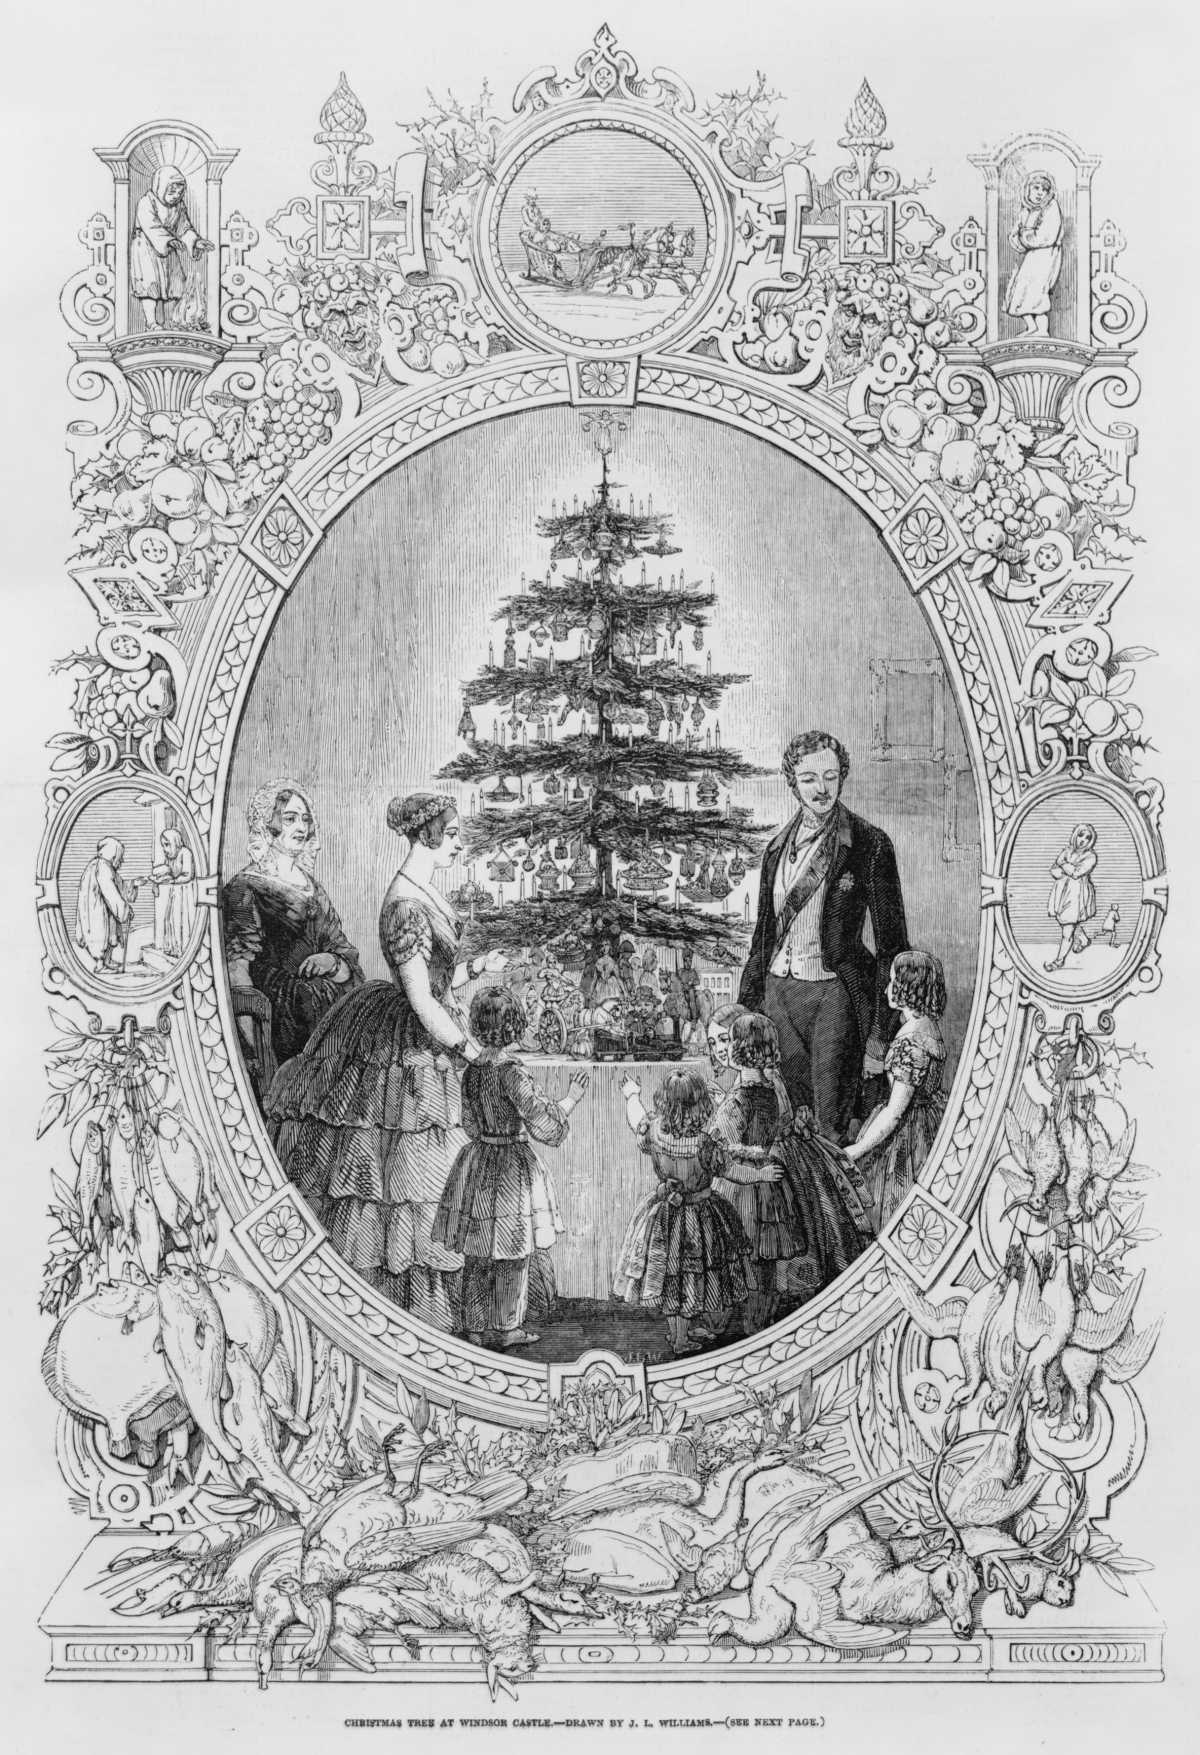 Christmas Tree at Windsor Castle, drawn by J. L. Williams, wood engraving. Illustration for The Illustrated London News, Christmas Number 1848